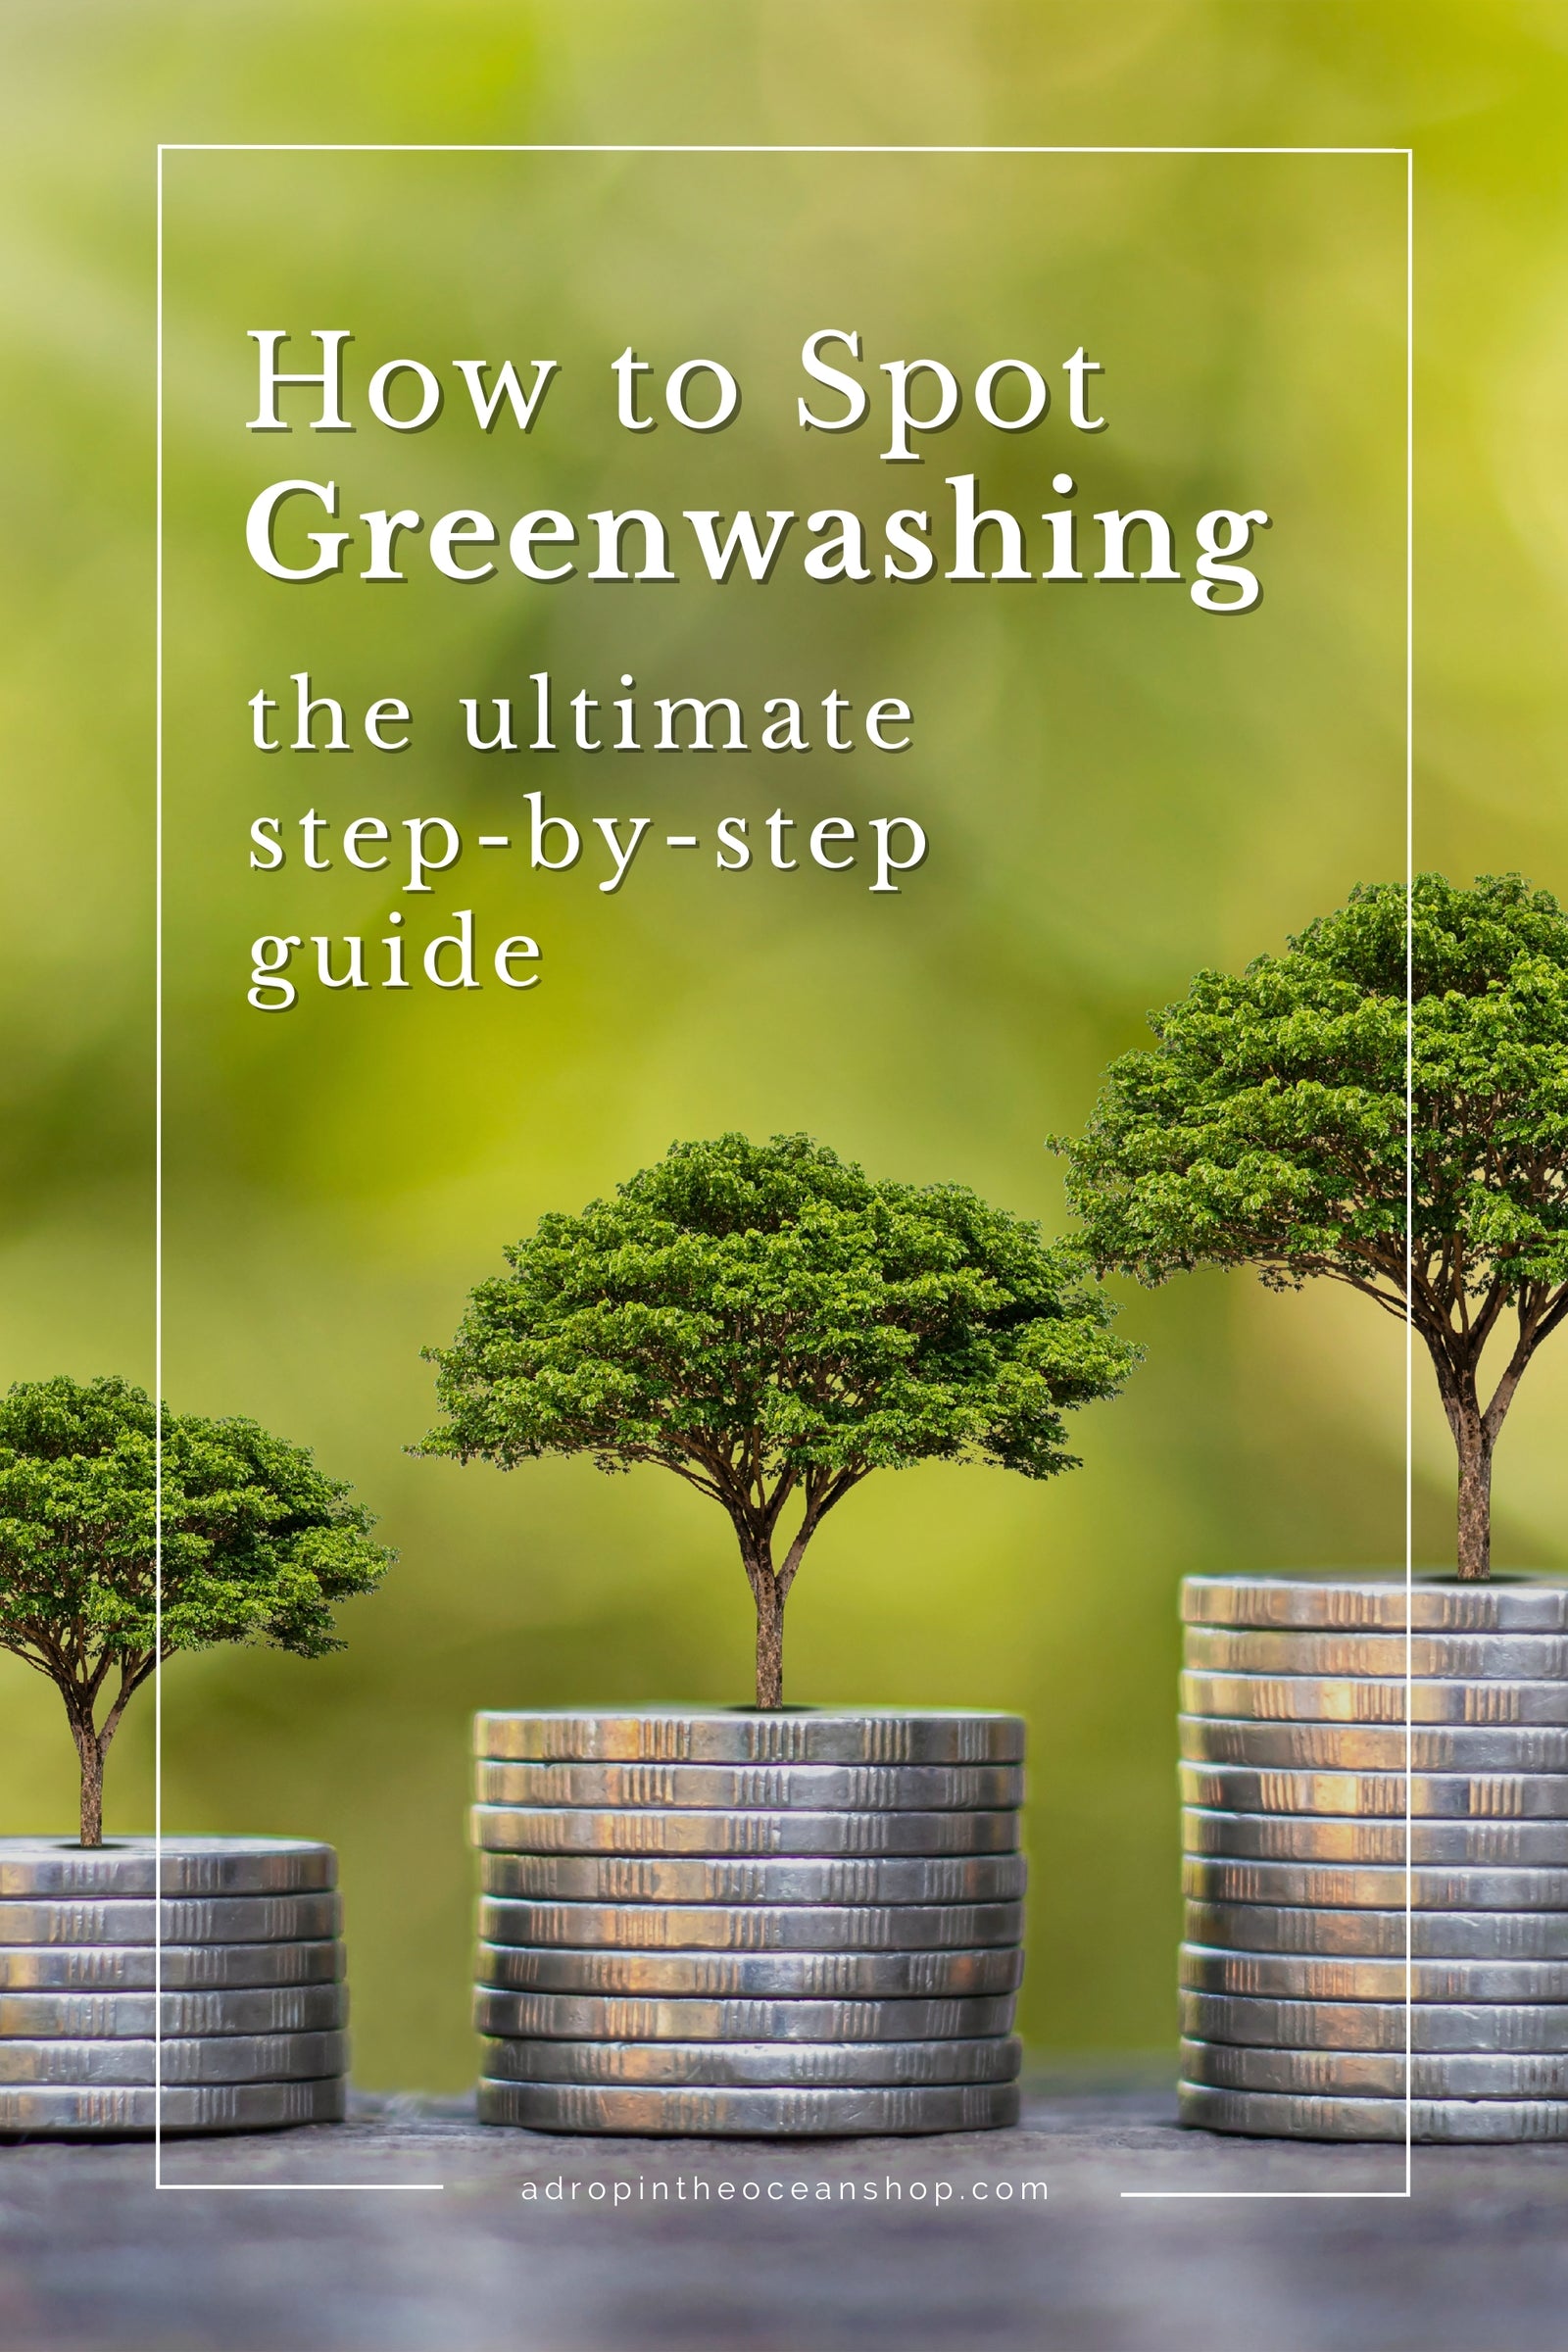 How to Spot Greenwashing: The Ultimate Step-by-Step Guide - A Drop in the Ocean Zero Waste Blog